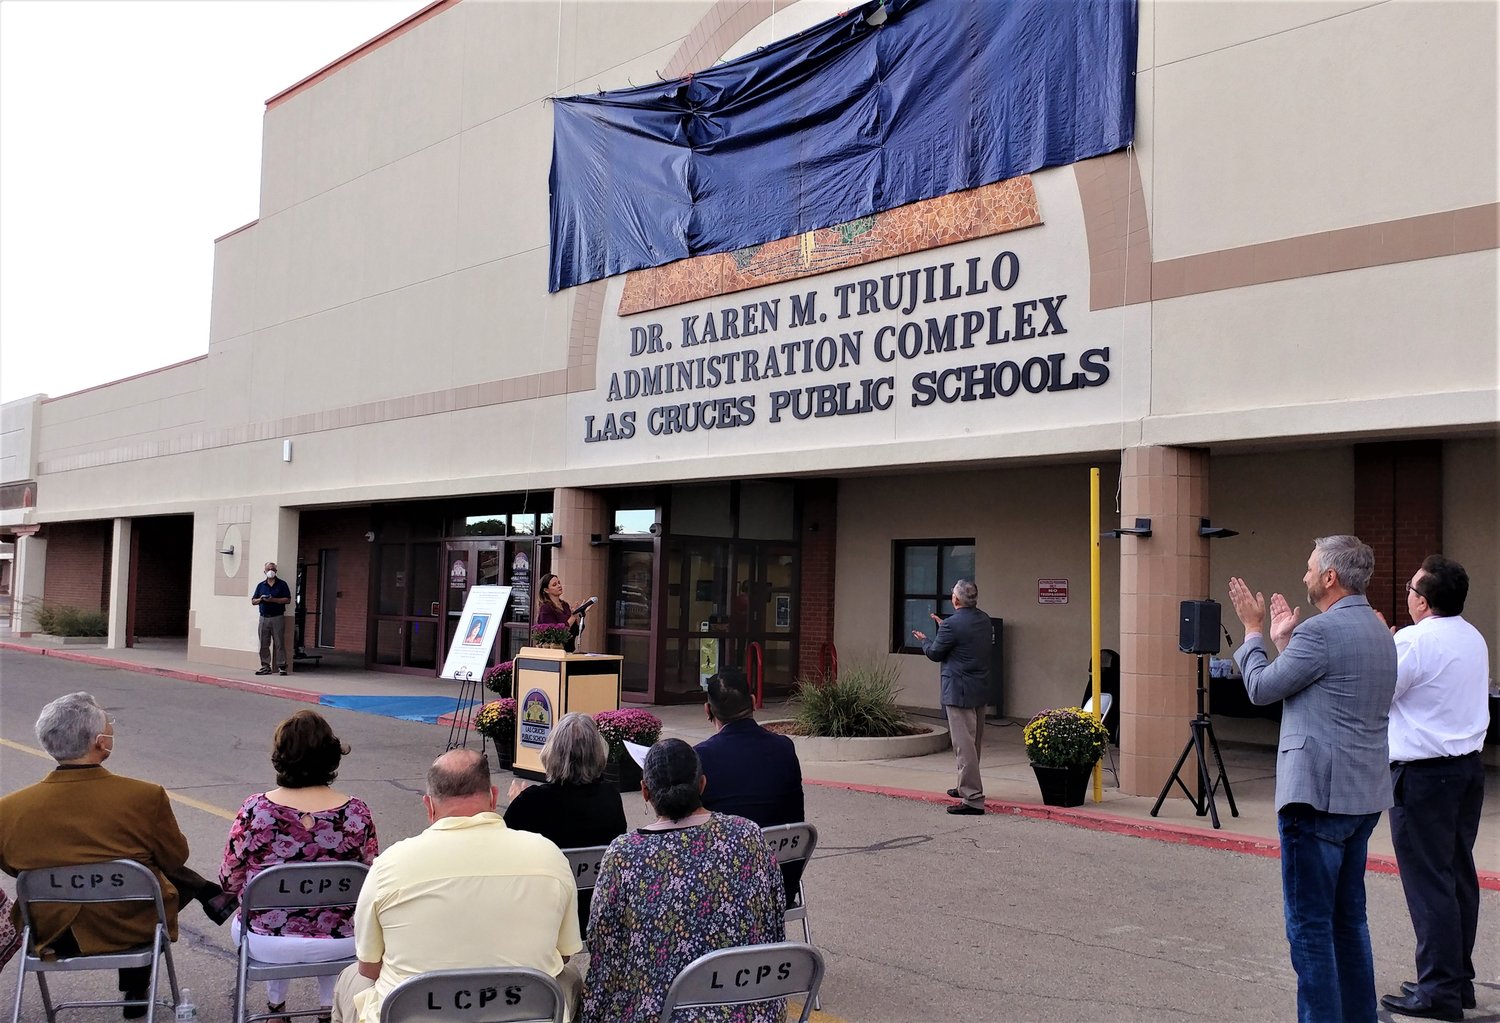 The September unveiling of the Las Cruces Public Schools administration building in honor of the late Superintendent Karen Trujillo